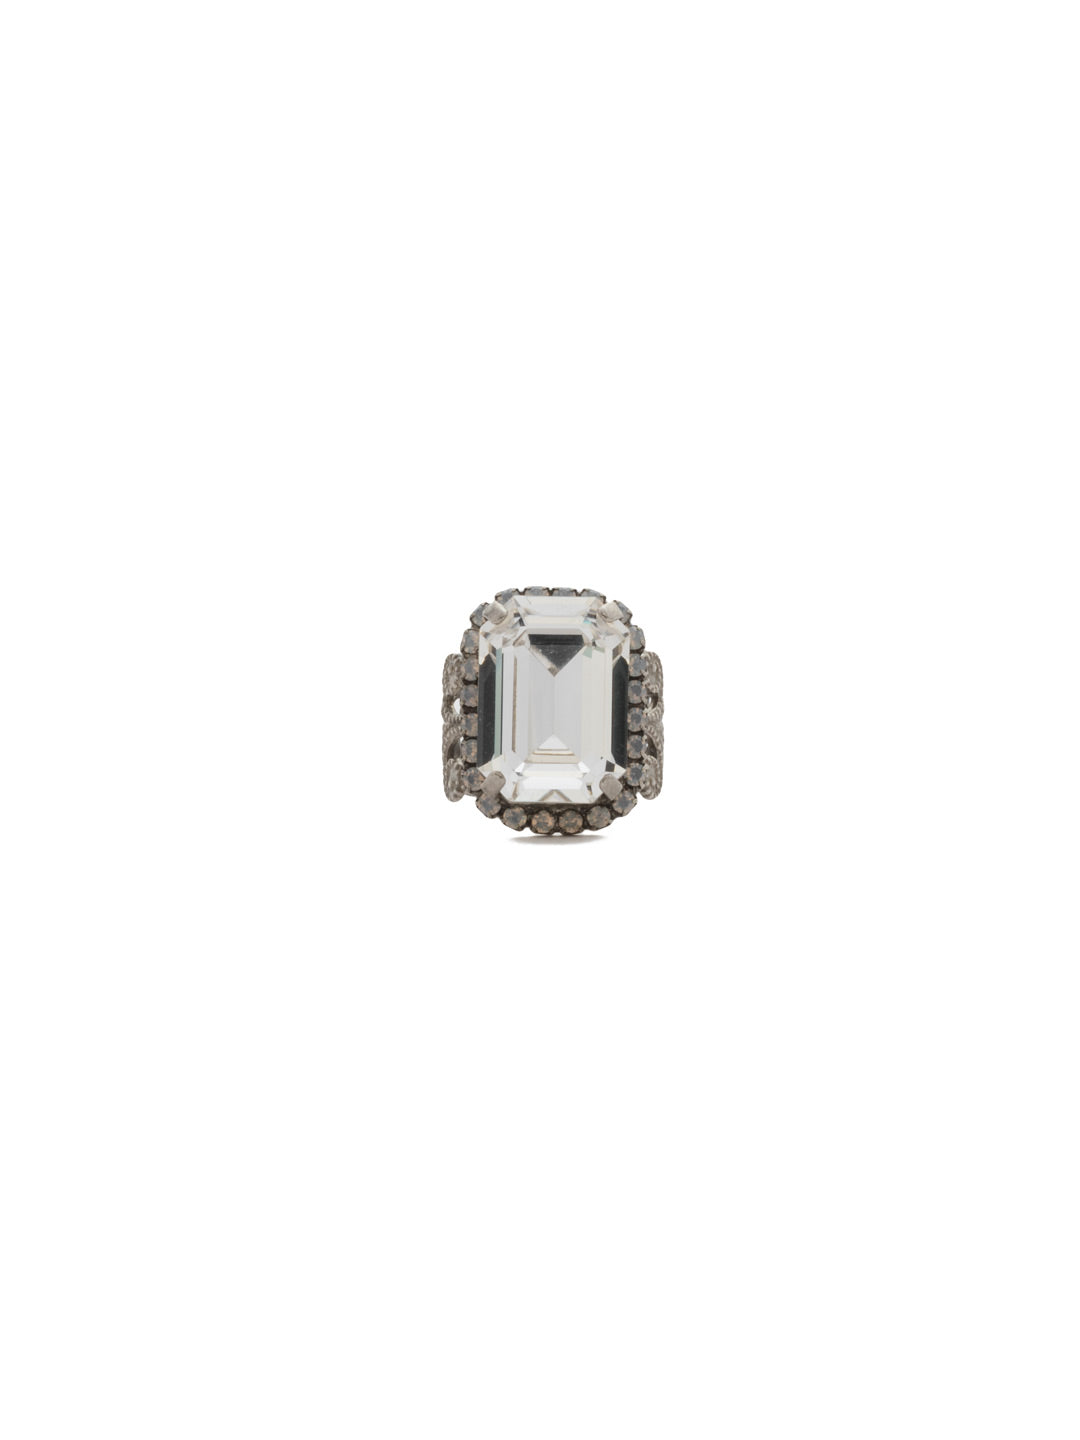 Petite Emerald-Cut Cocktail Ring - RCF9ASWBR - Too fine a piece to be overlooked! This classic ring features a large, central emerald cut crystal framed by a row of round gemstones set on an intricate, filigree band. From Sorrelli's White Bridal collection in our Antique Silver-tone finish.